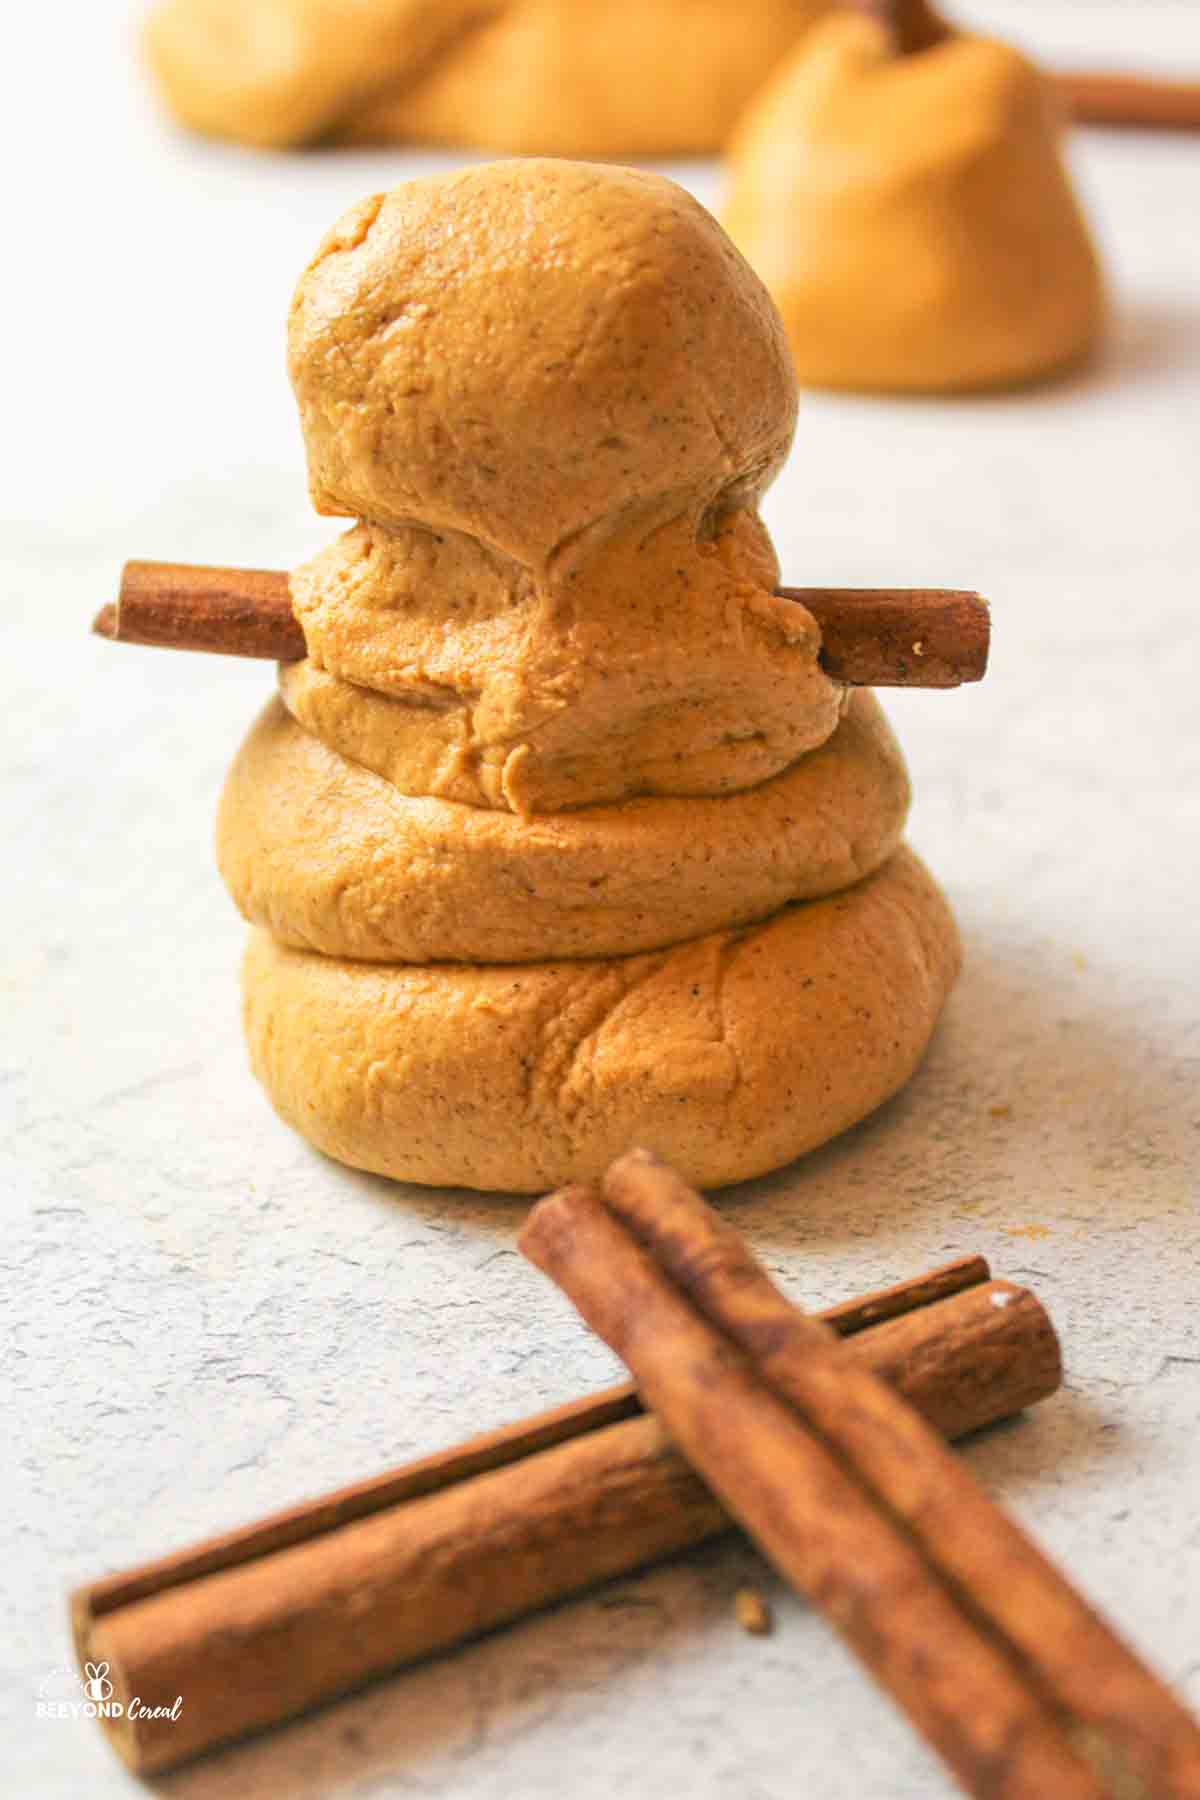 a small snowman shape made from pumpkin playdough with cinnamon stick arms and cinnamon sticks in front